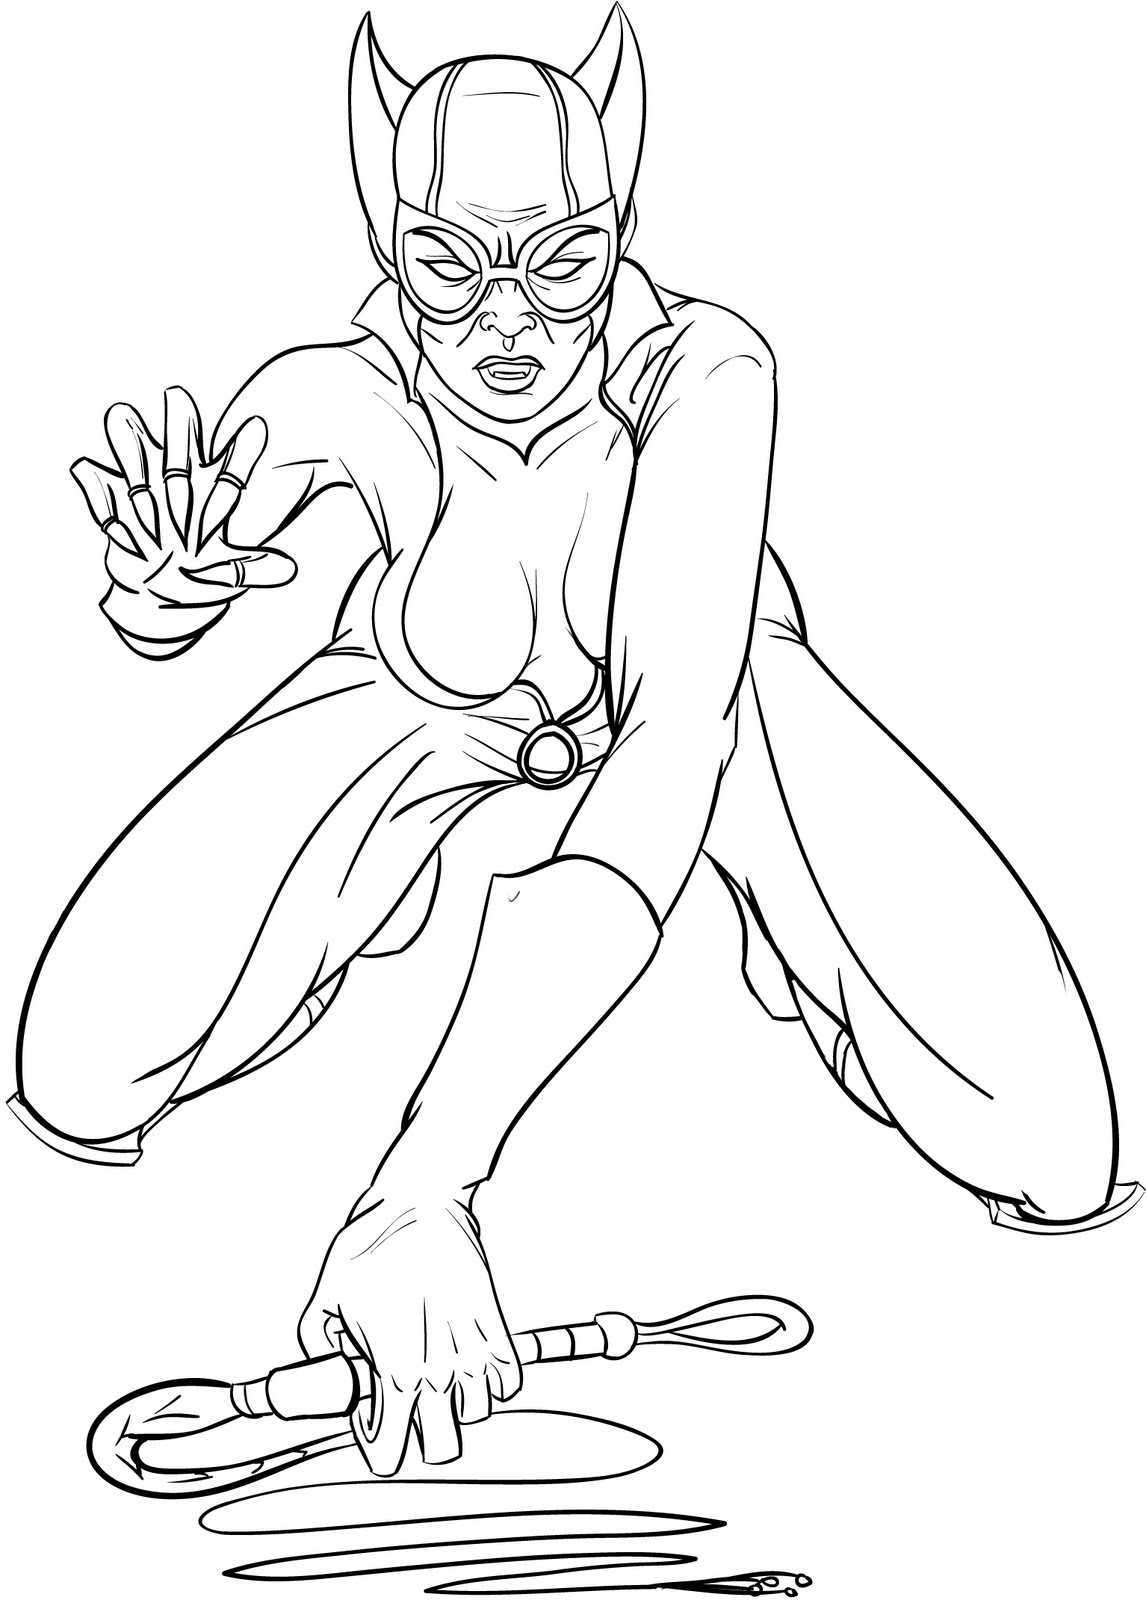 Download Interactive Magazine: Catwoman coloring pictures for kids